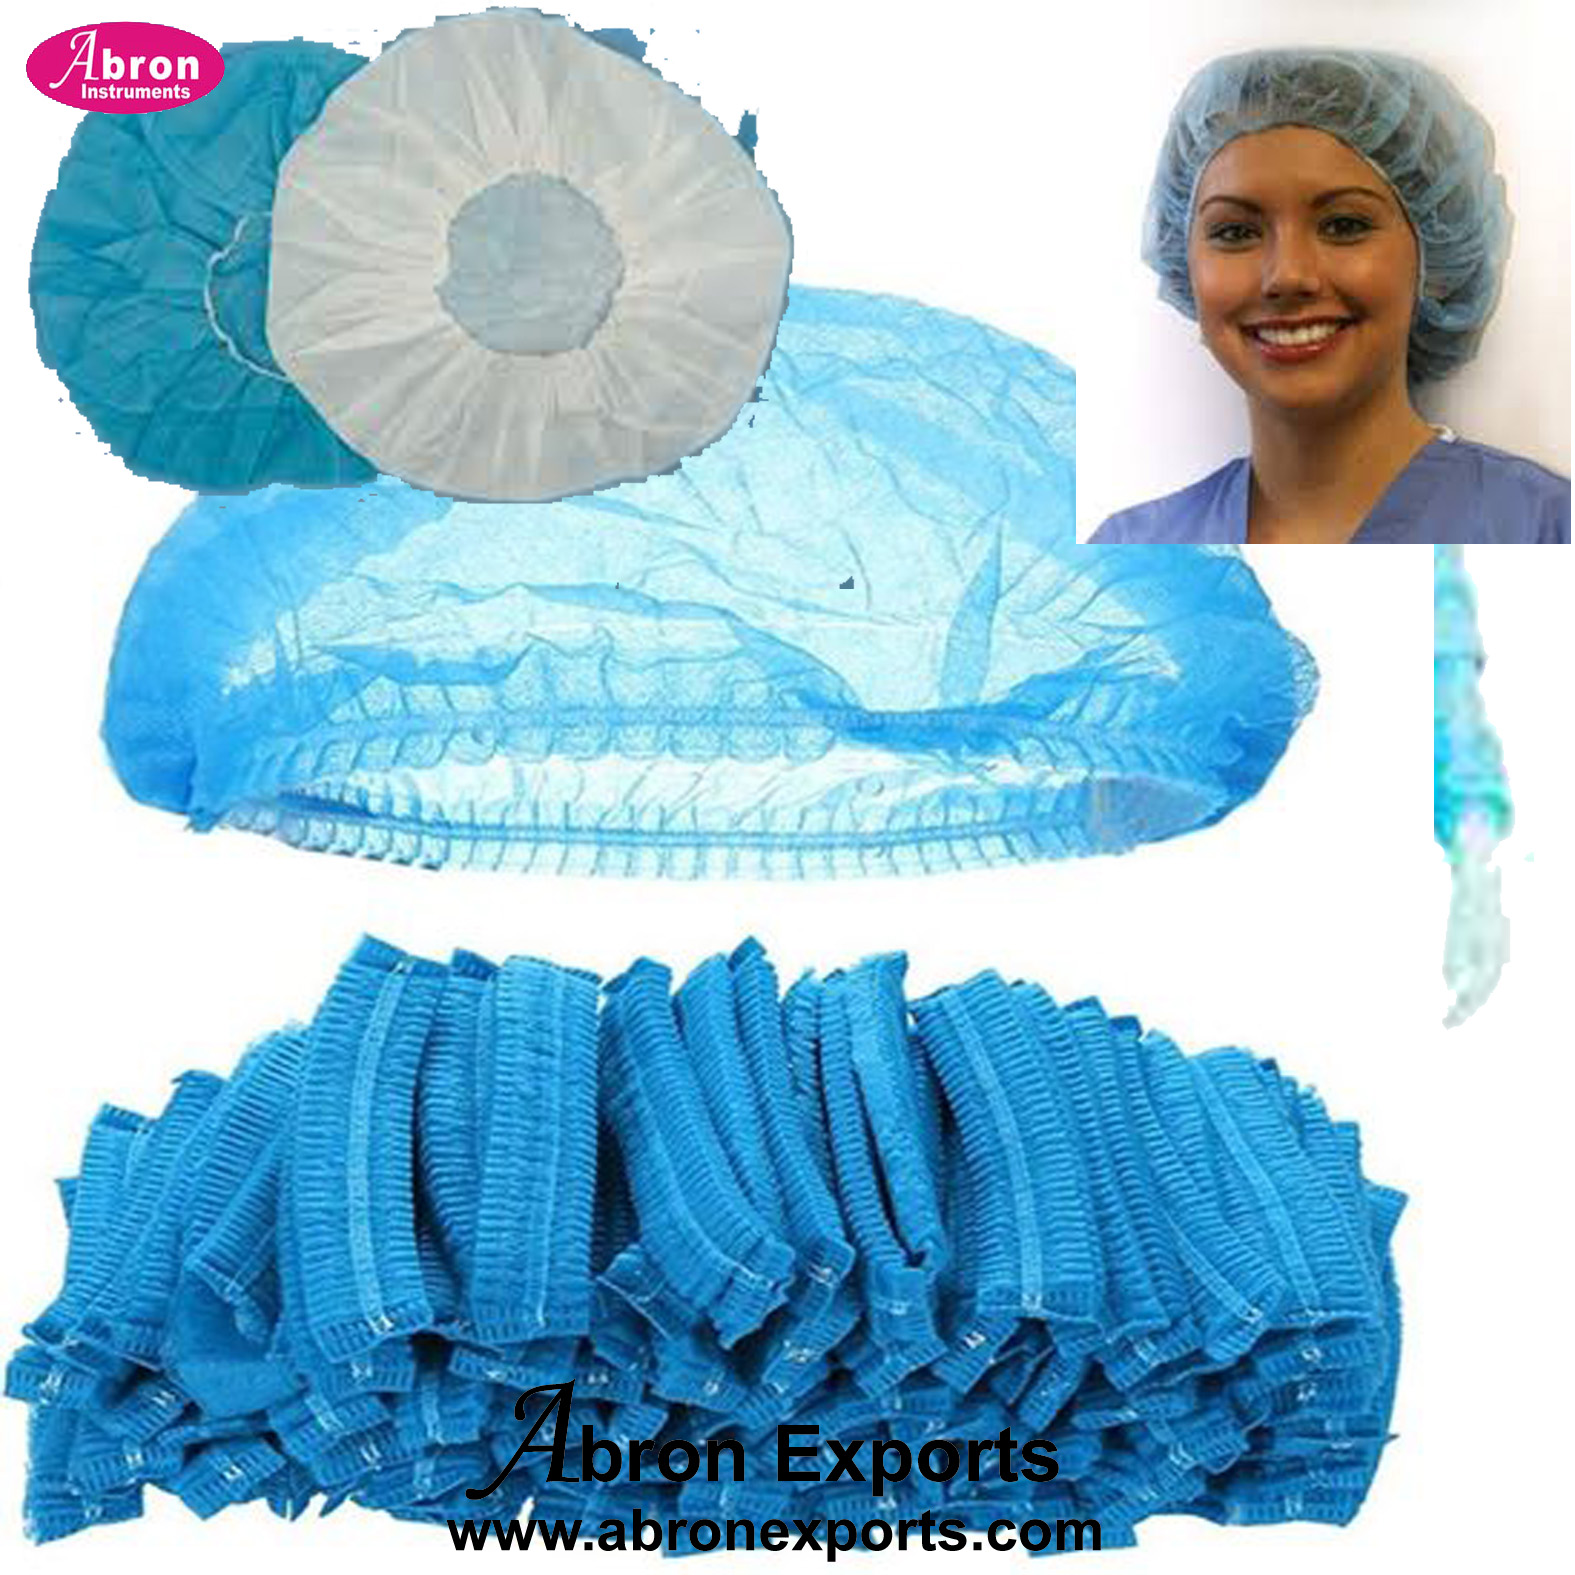 Surgical Disposable Cap bouffant cap non woven blue for hospital lab pack of 100 Abron ABM-2451BC 